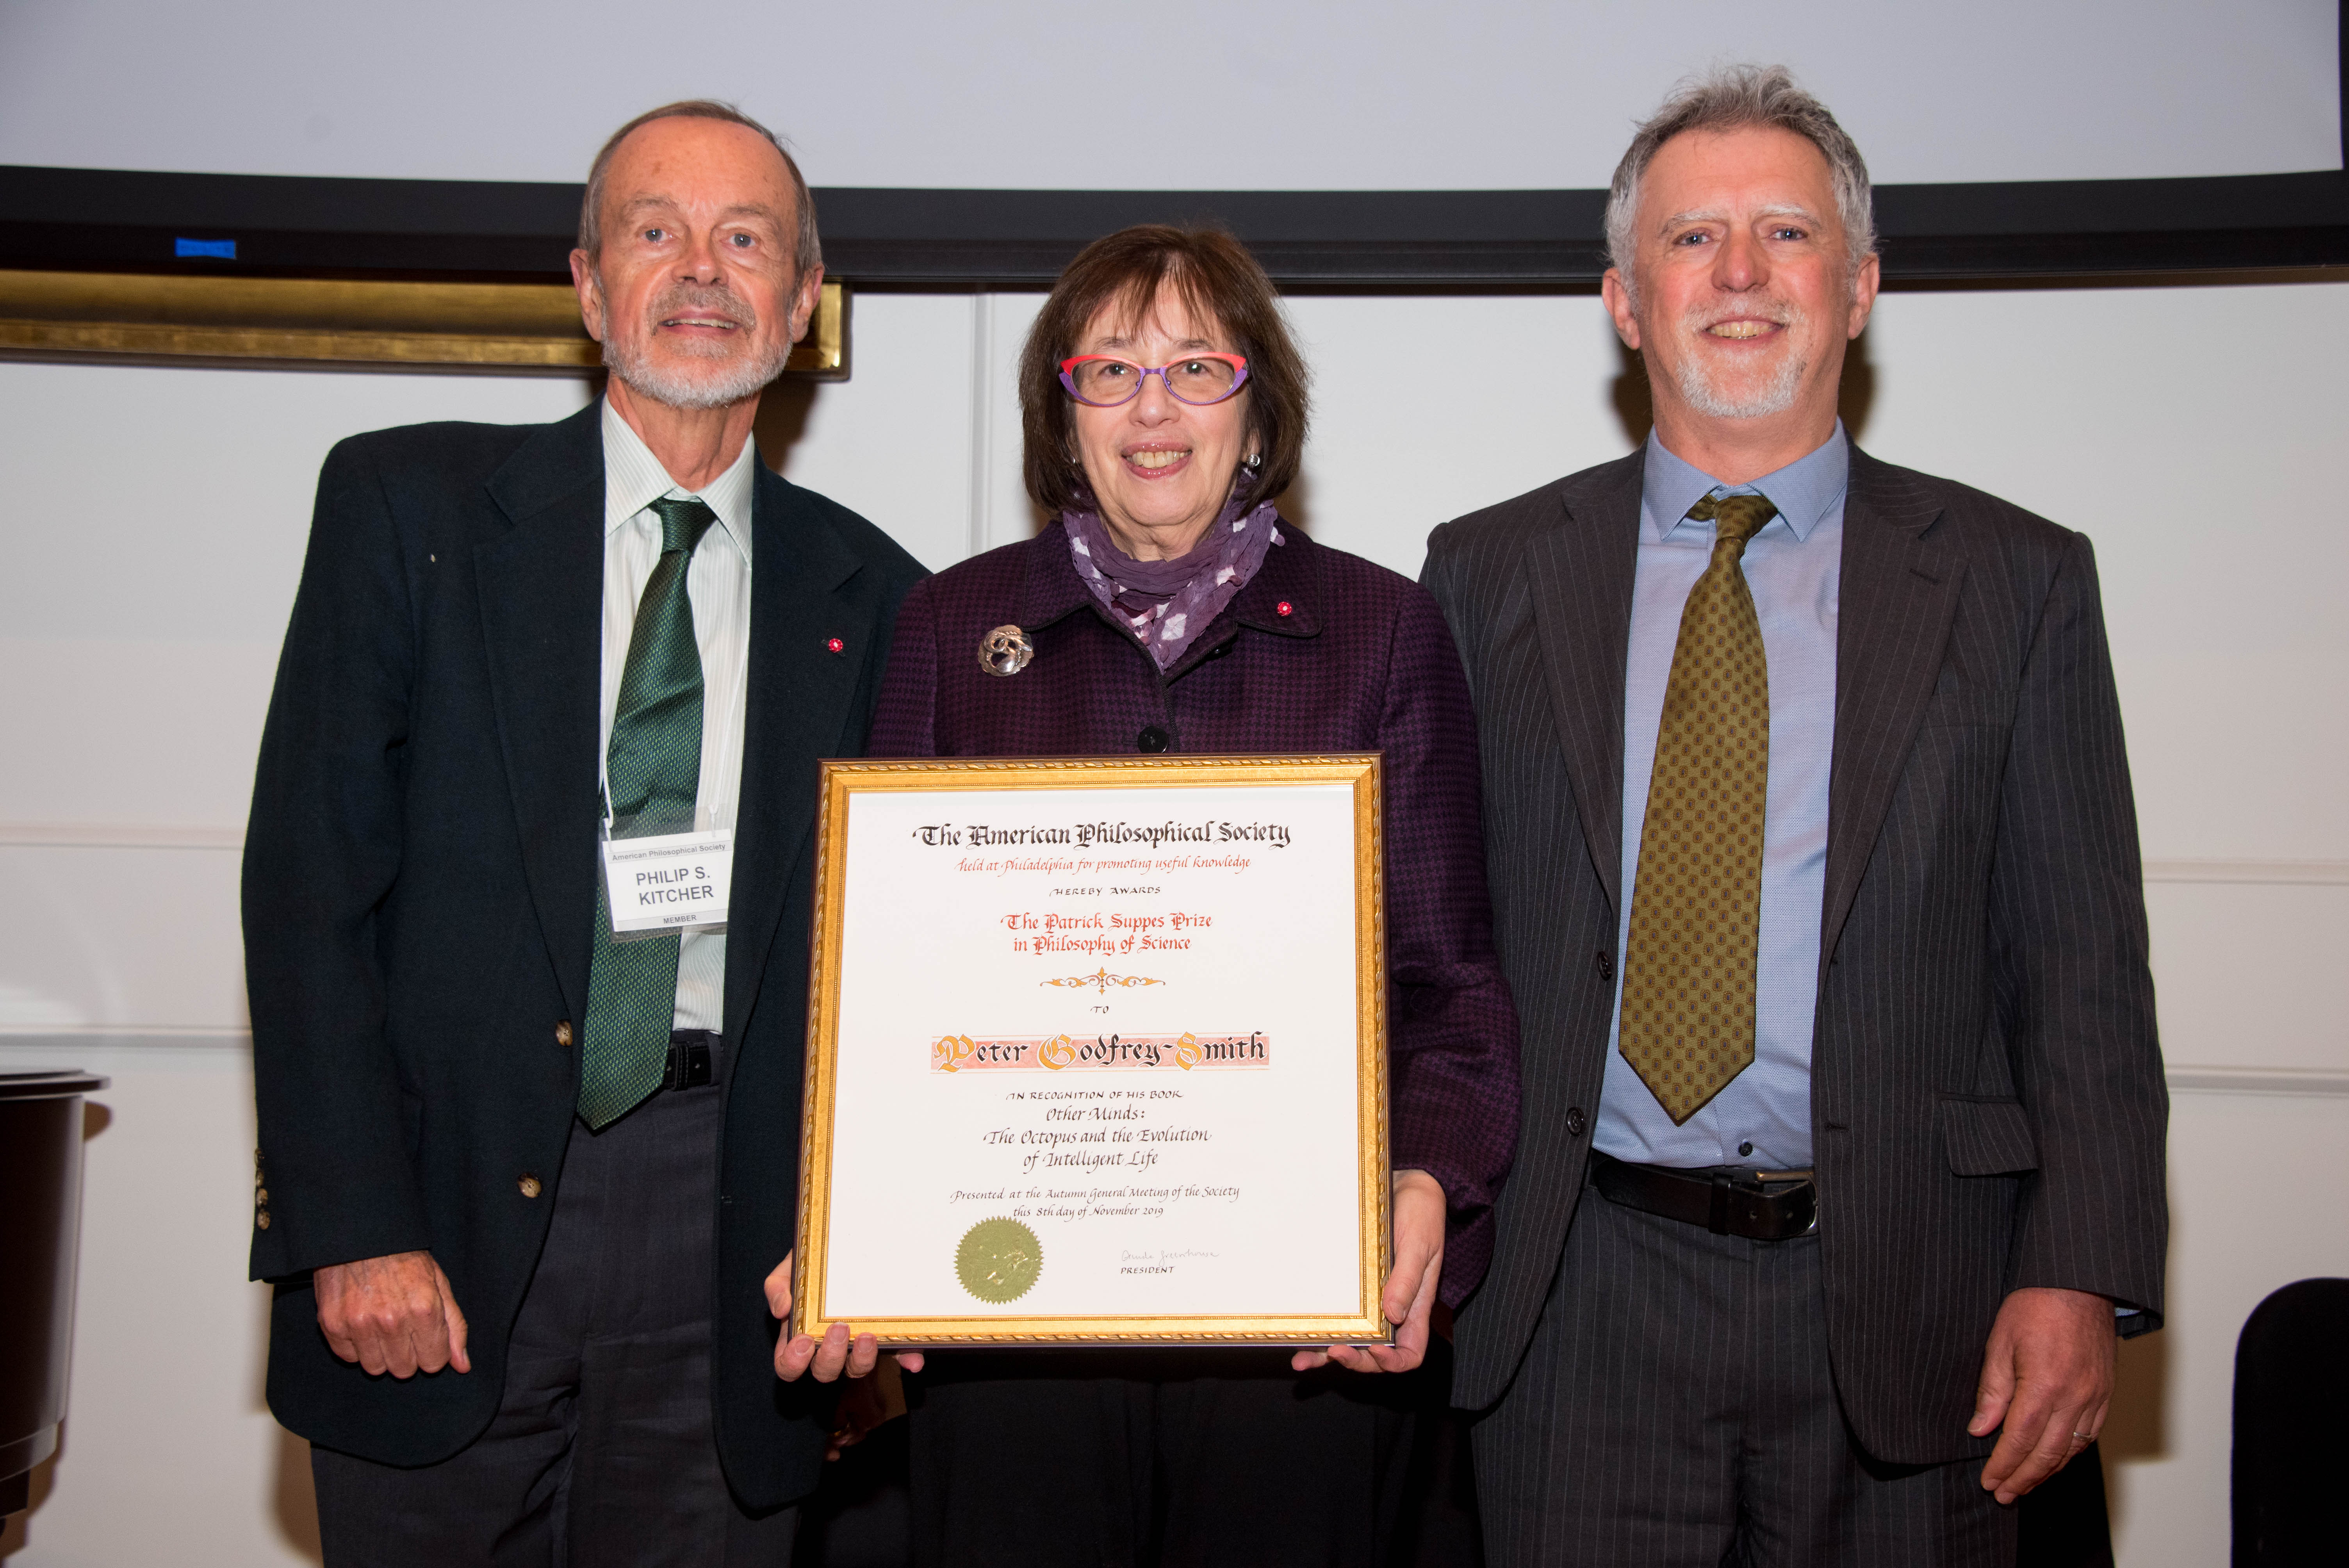 Linda Greenhouse holds the Suppes Prize certificate, standing between Phillip Kitcher and Peter Godfrey-Smith